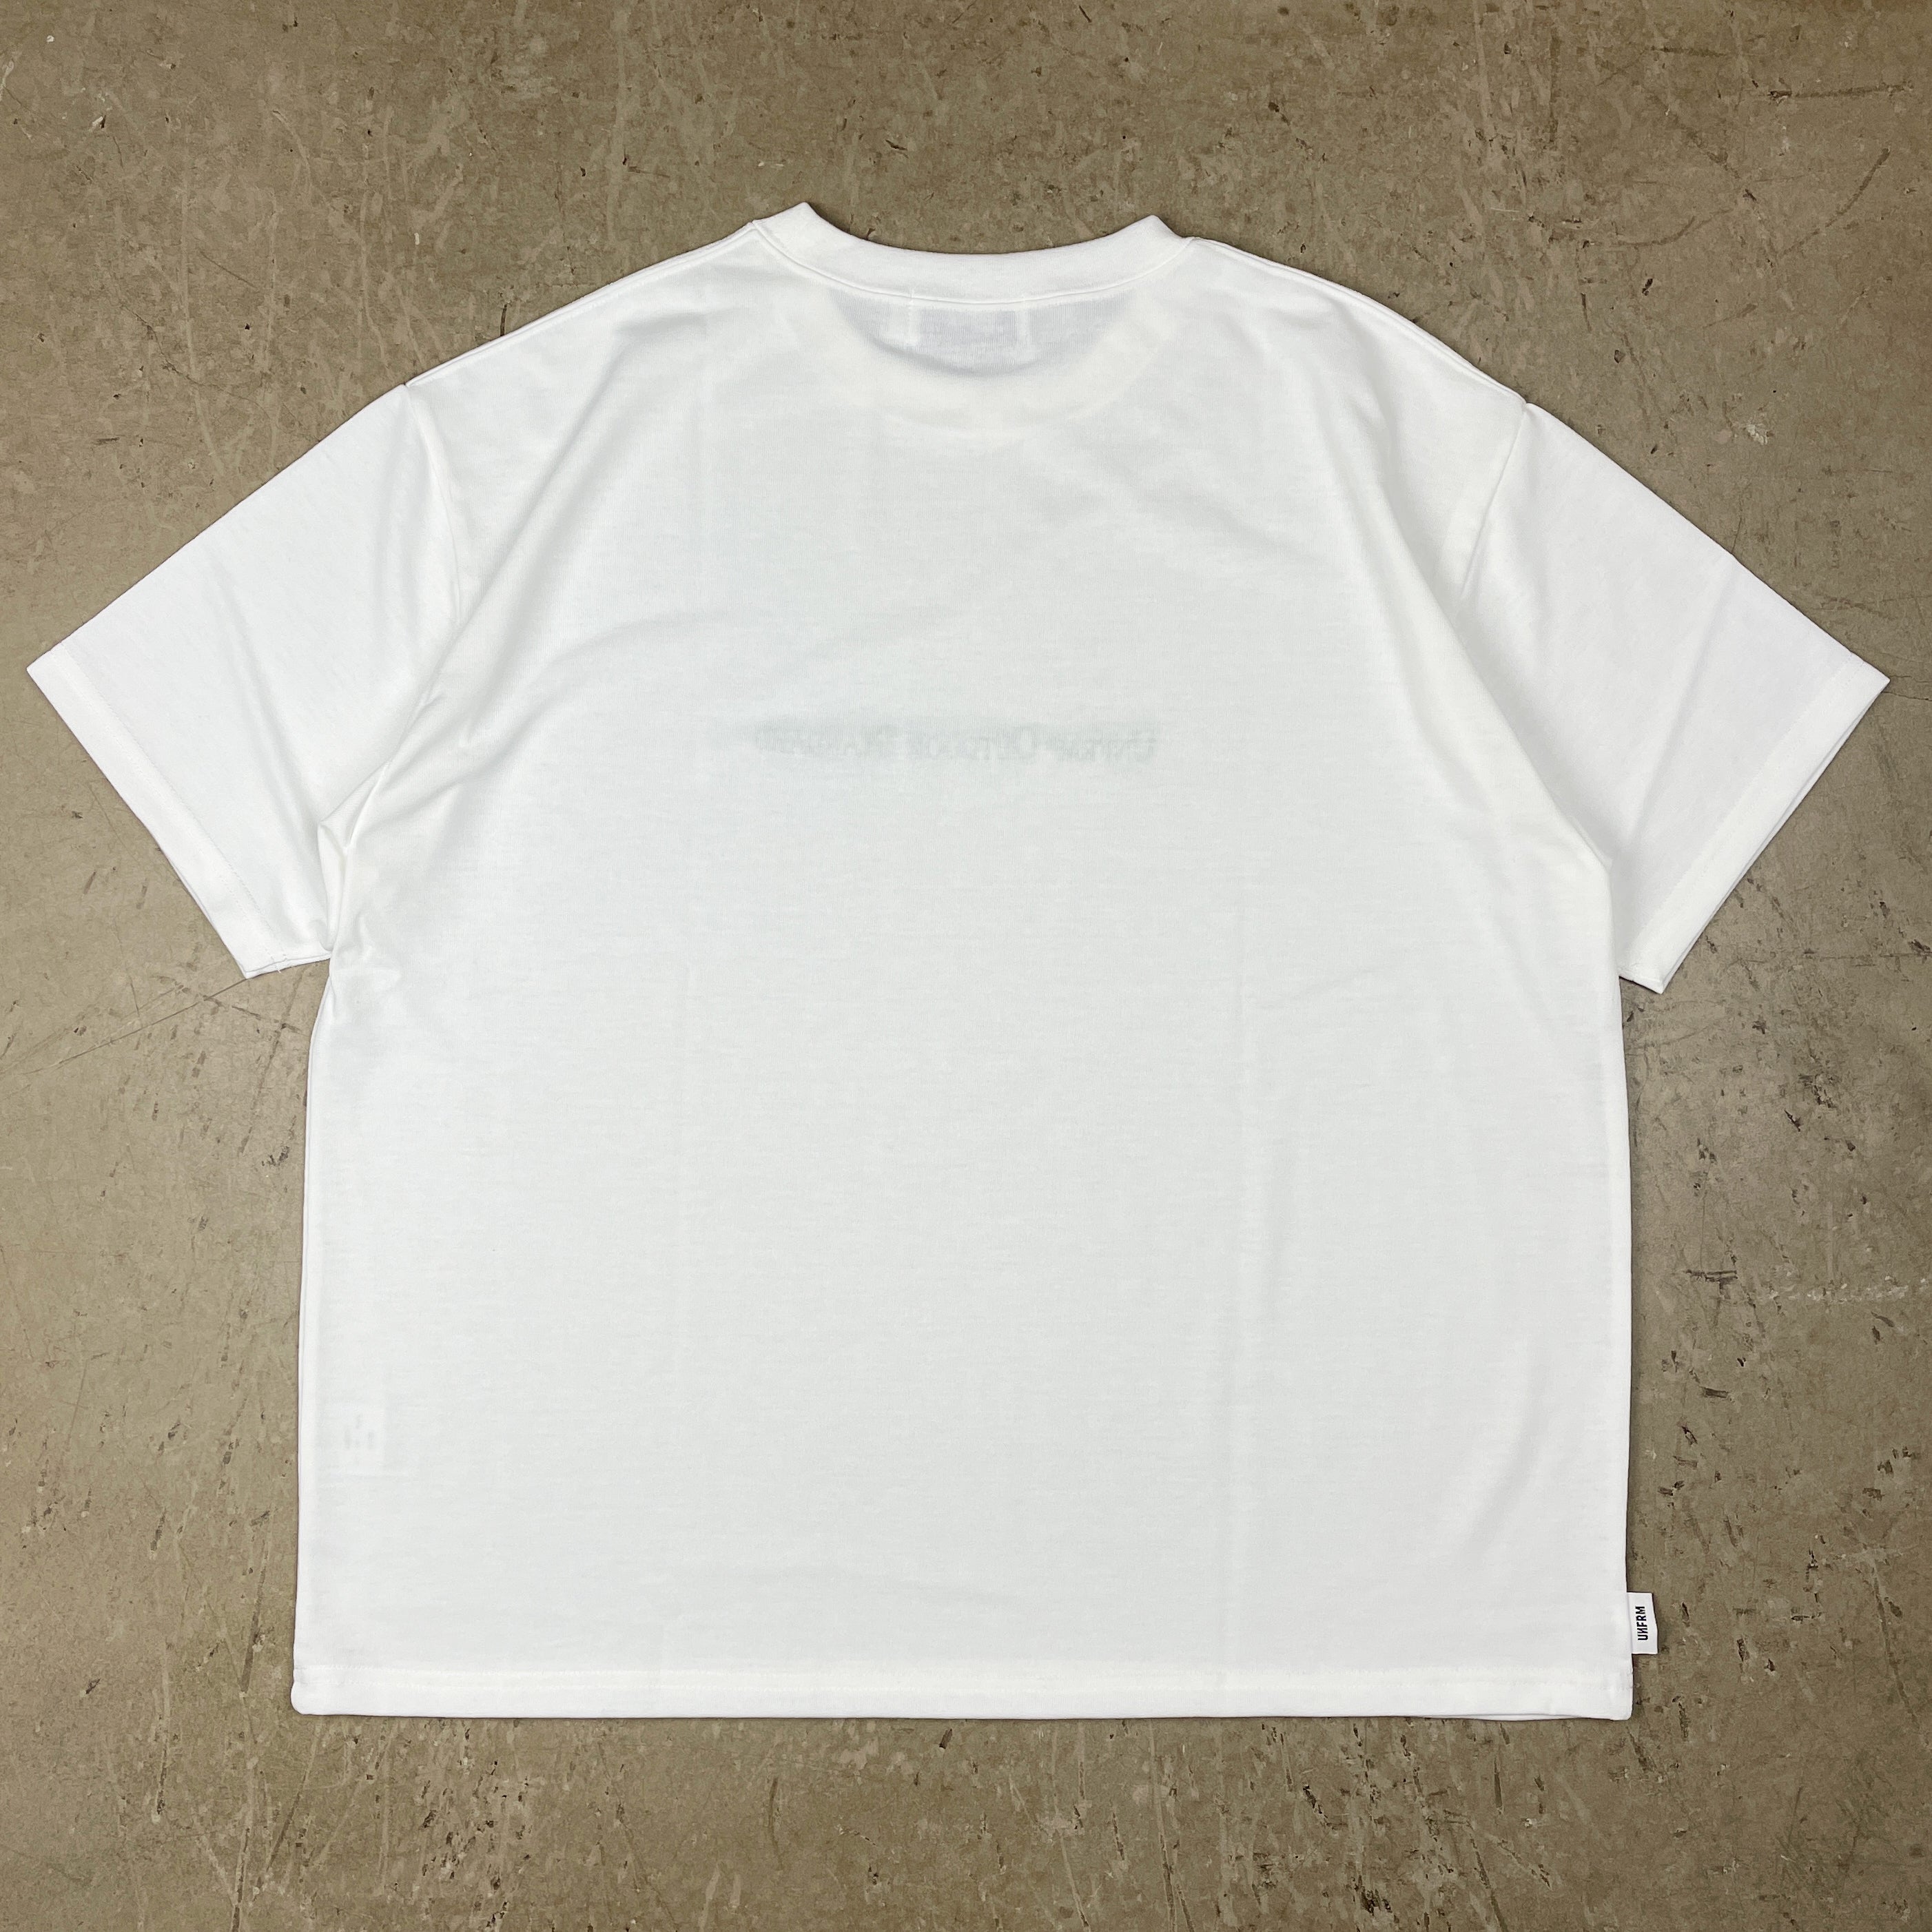 HEAVY WEIGHT EMBROIDERED LOGO DRY T-SHIRT